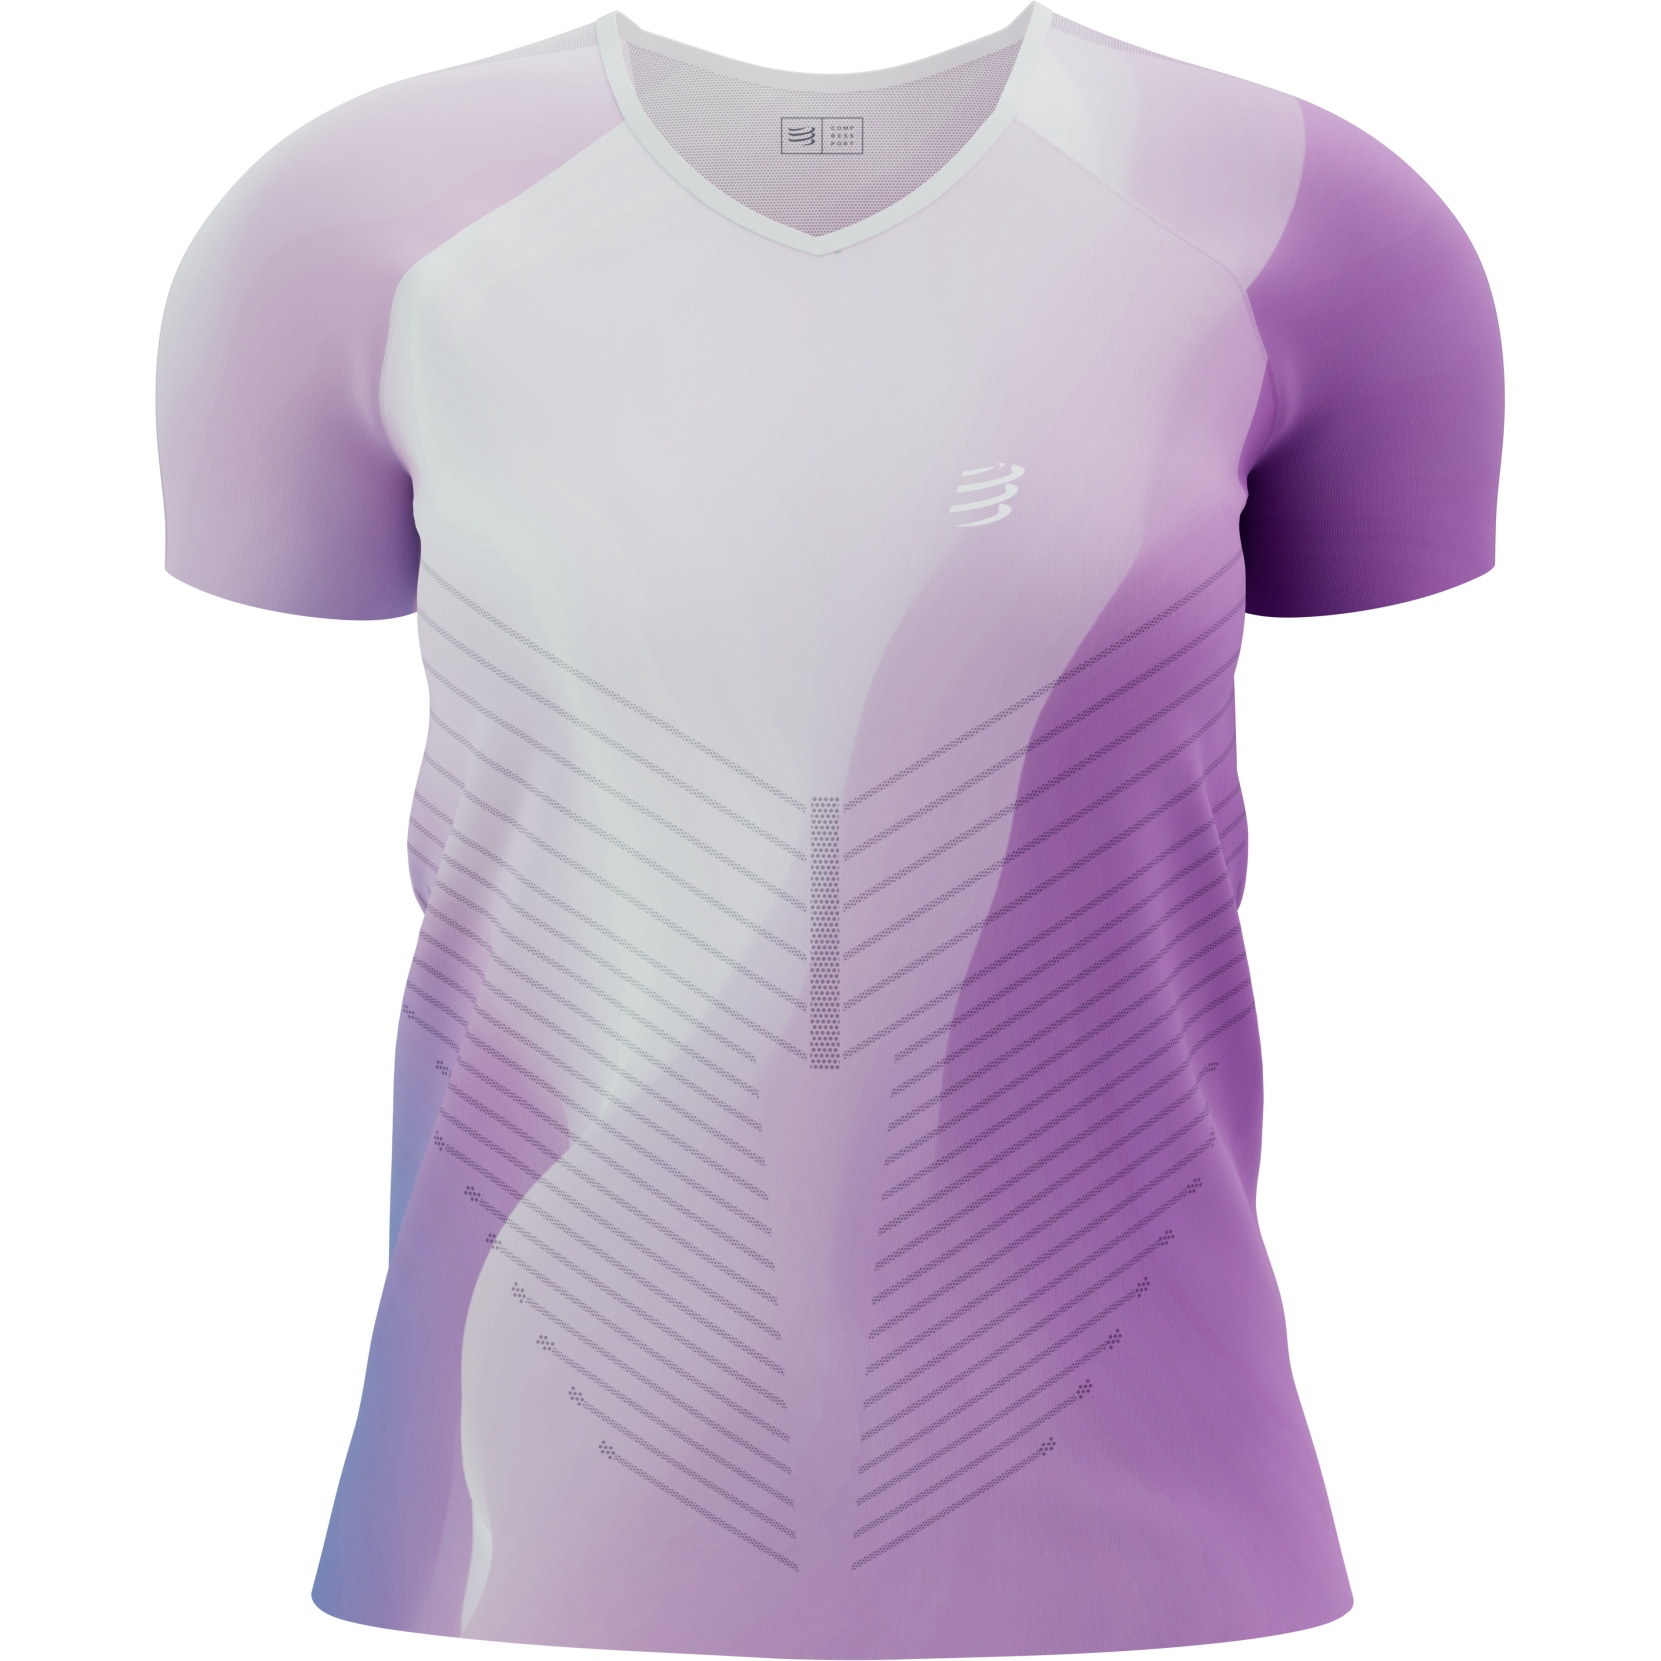 Picture of Compressport Performance T-Shirt Women - royal lilac/lupine/white